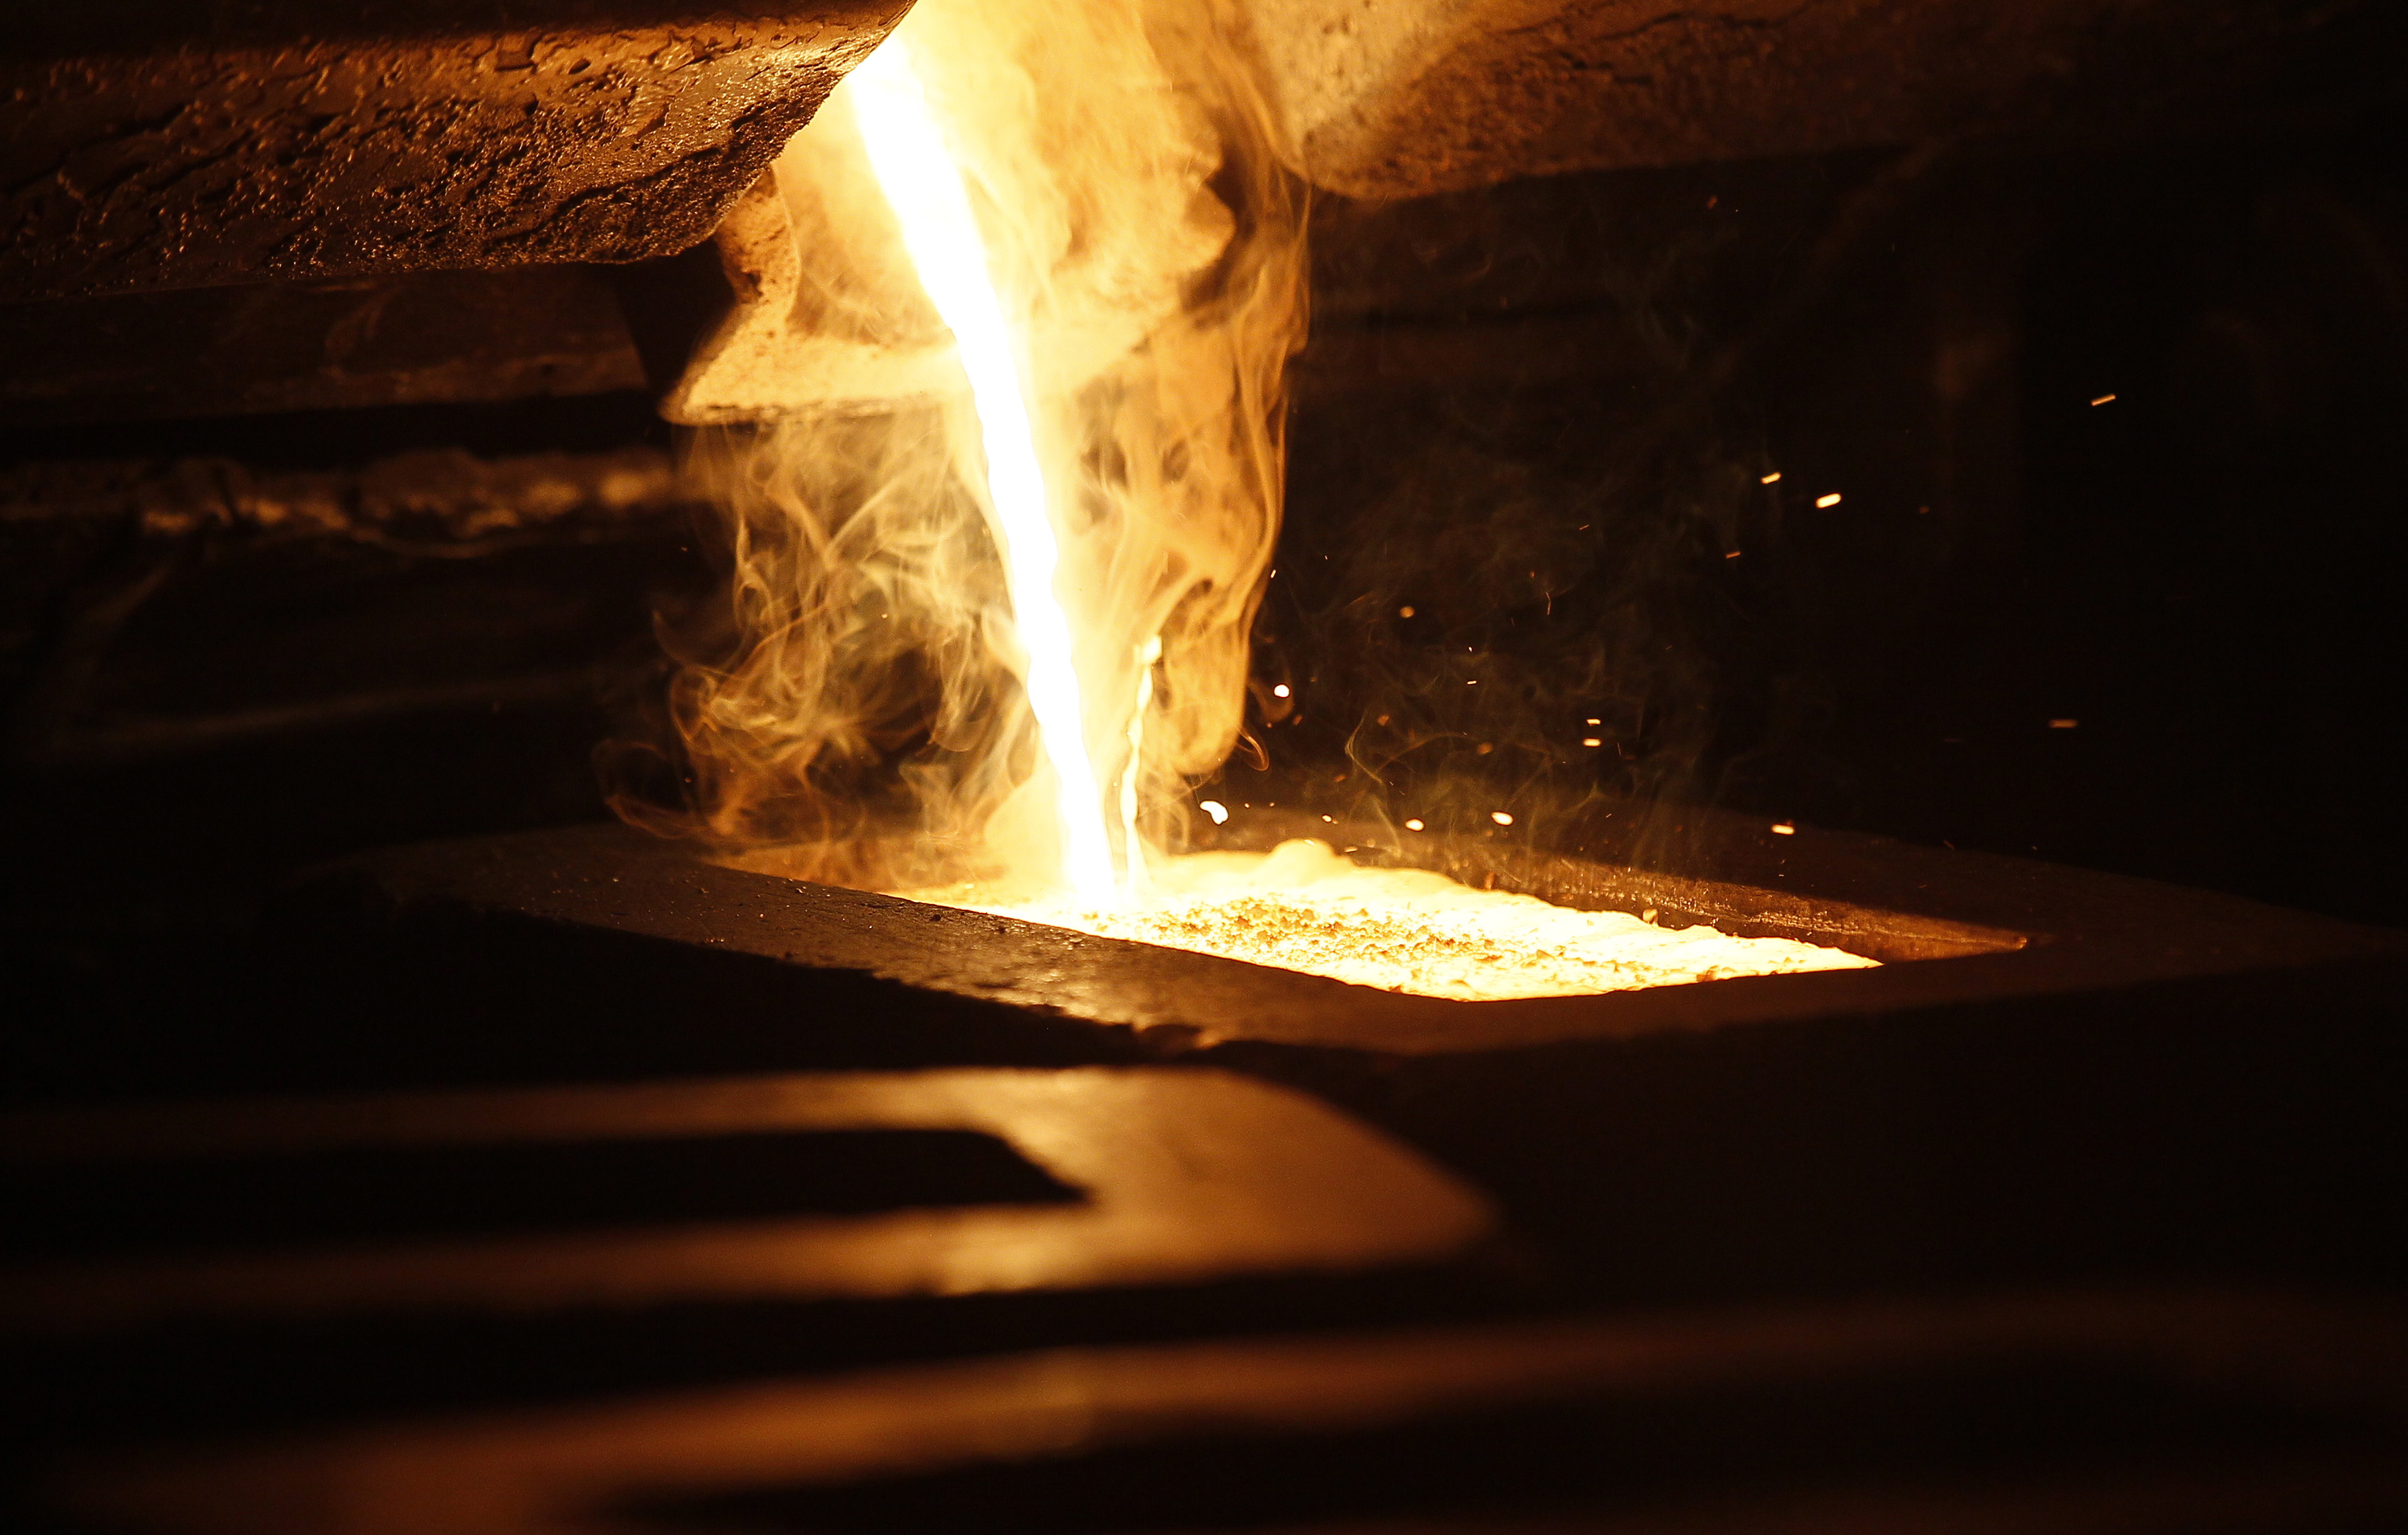 Liquid gold is poured to form gold dore bars at Newmont Mining's Carlin gold mine operation near Elko, Nevada, May 21, 2014.